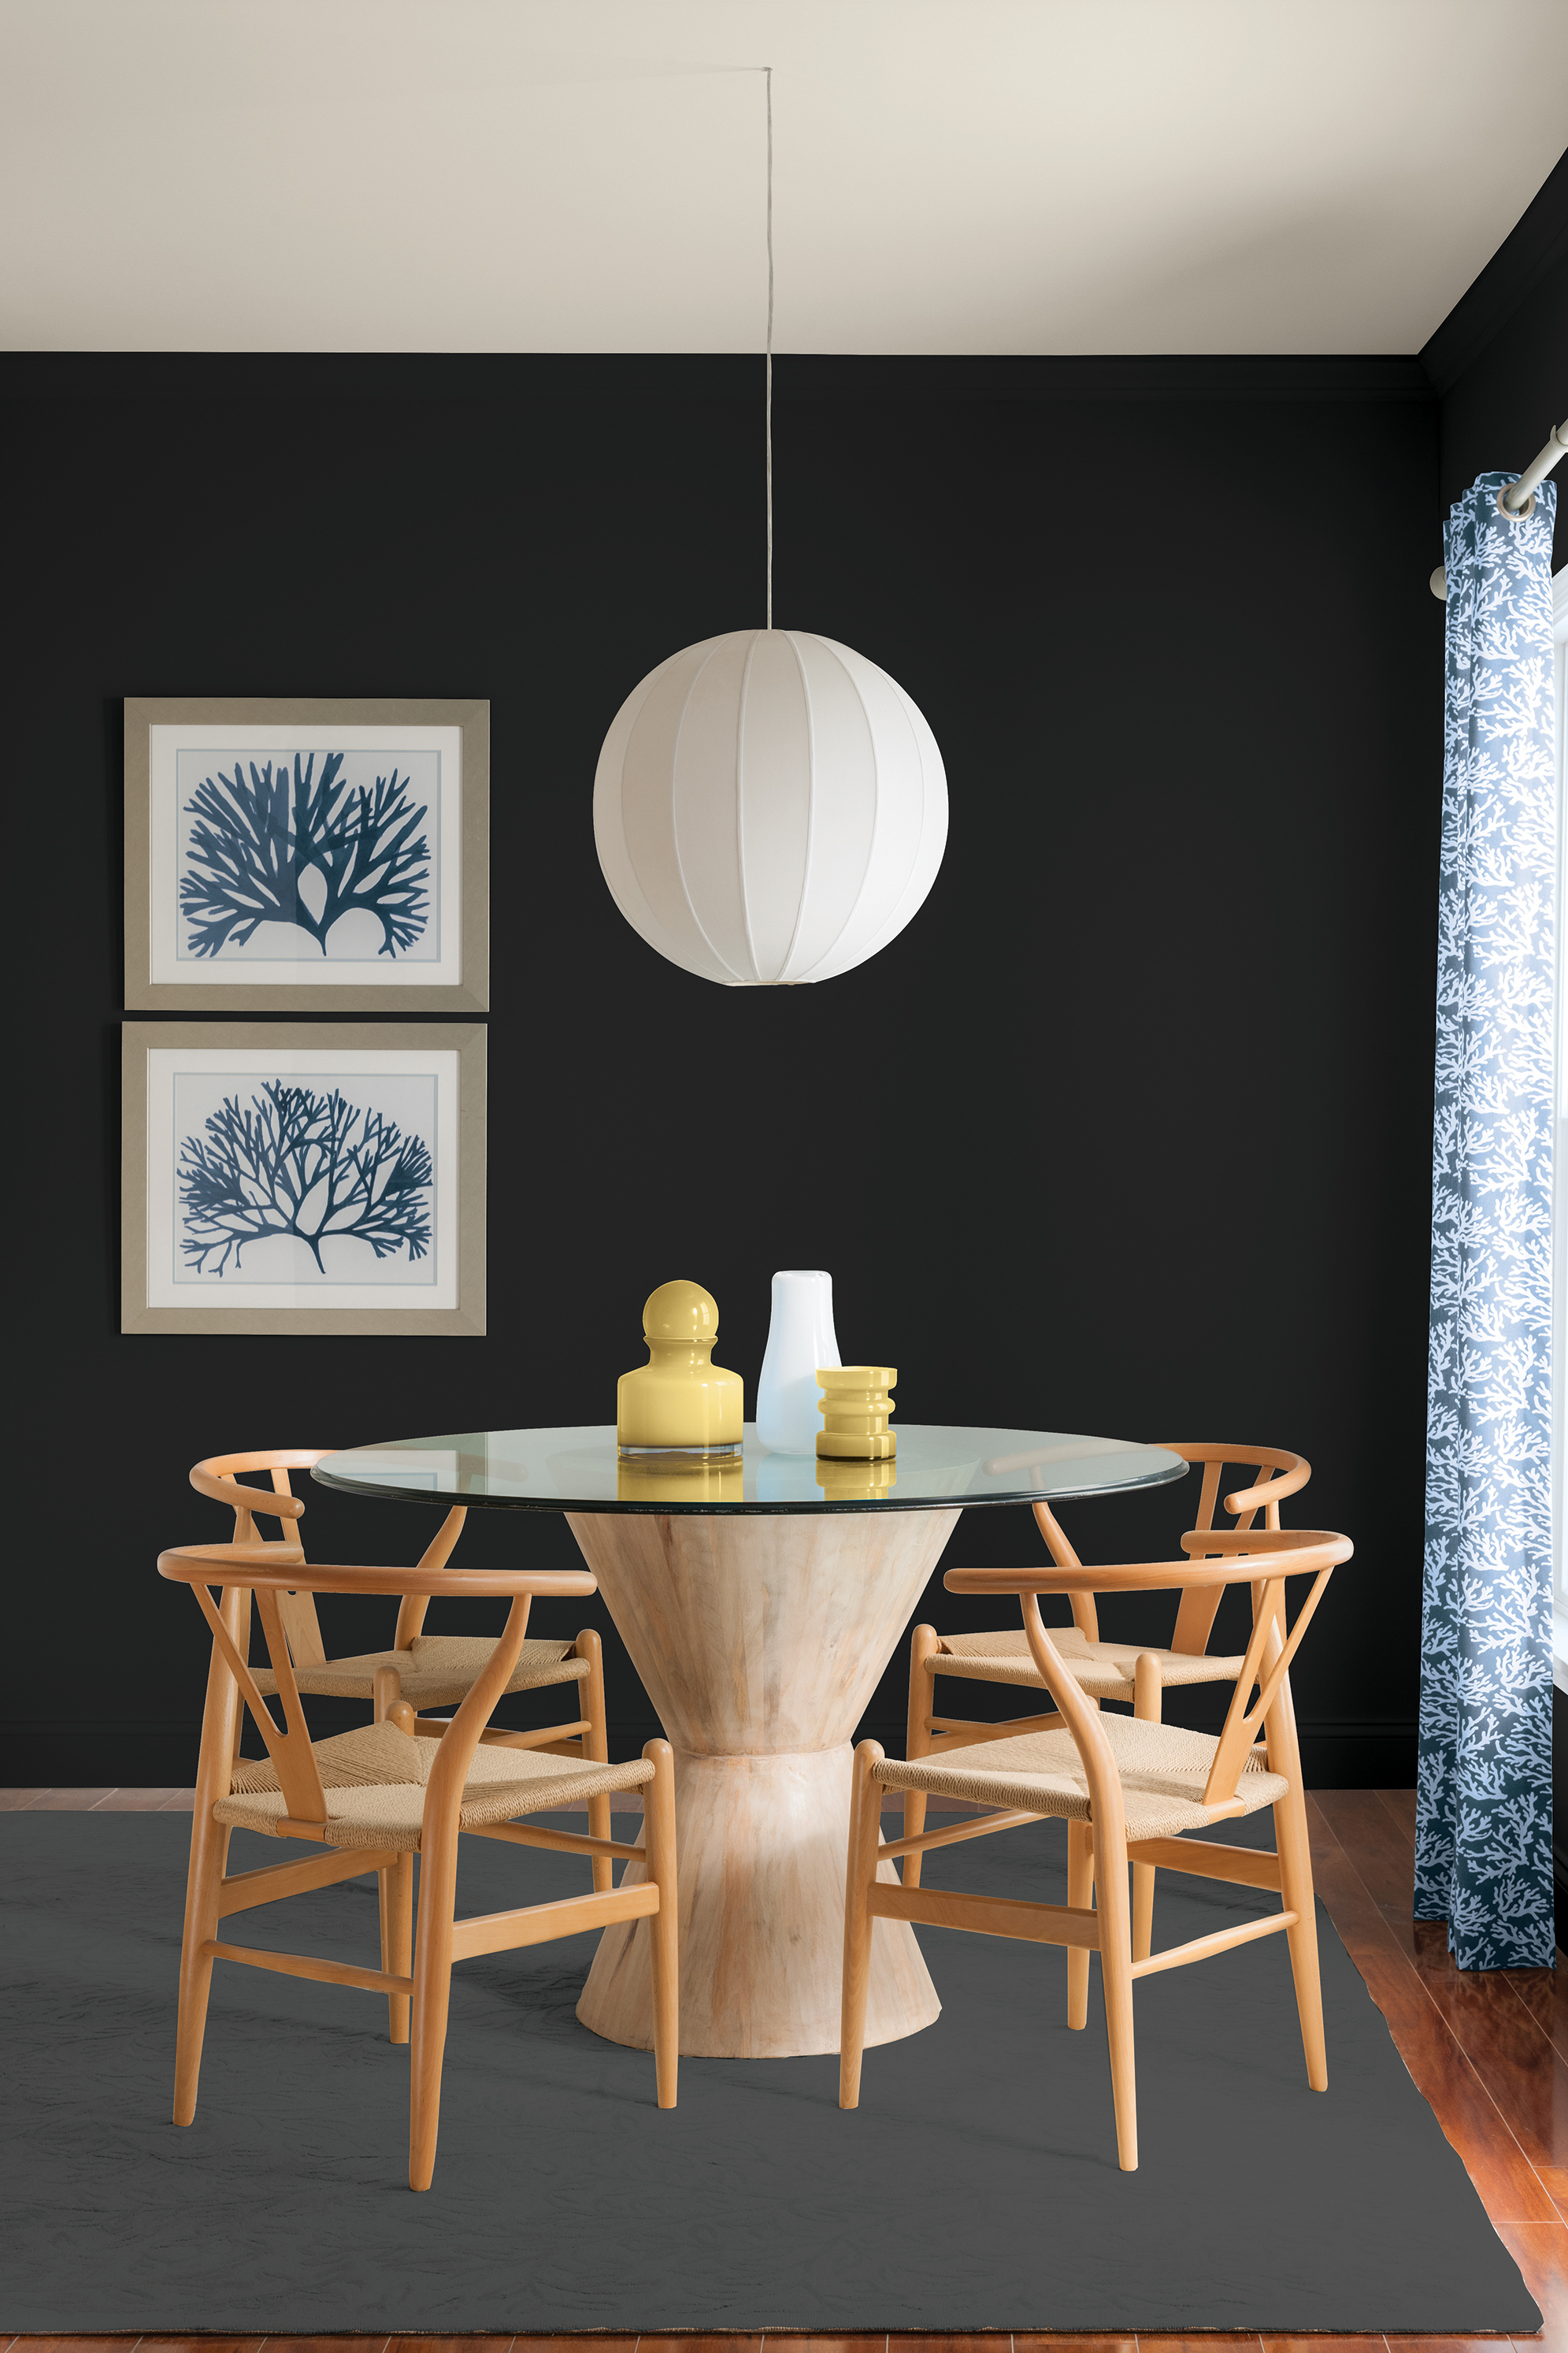 Glidden Brand By Ppg Names 2018 Color Of The Year Deep Onyx